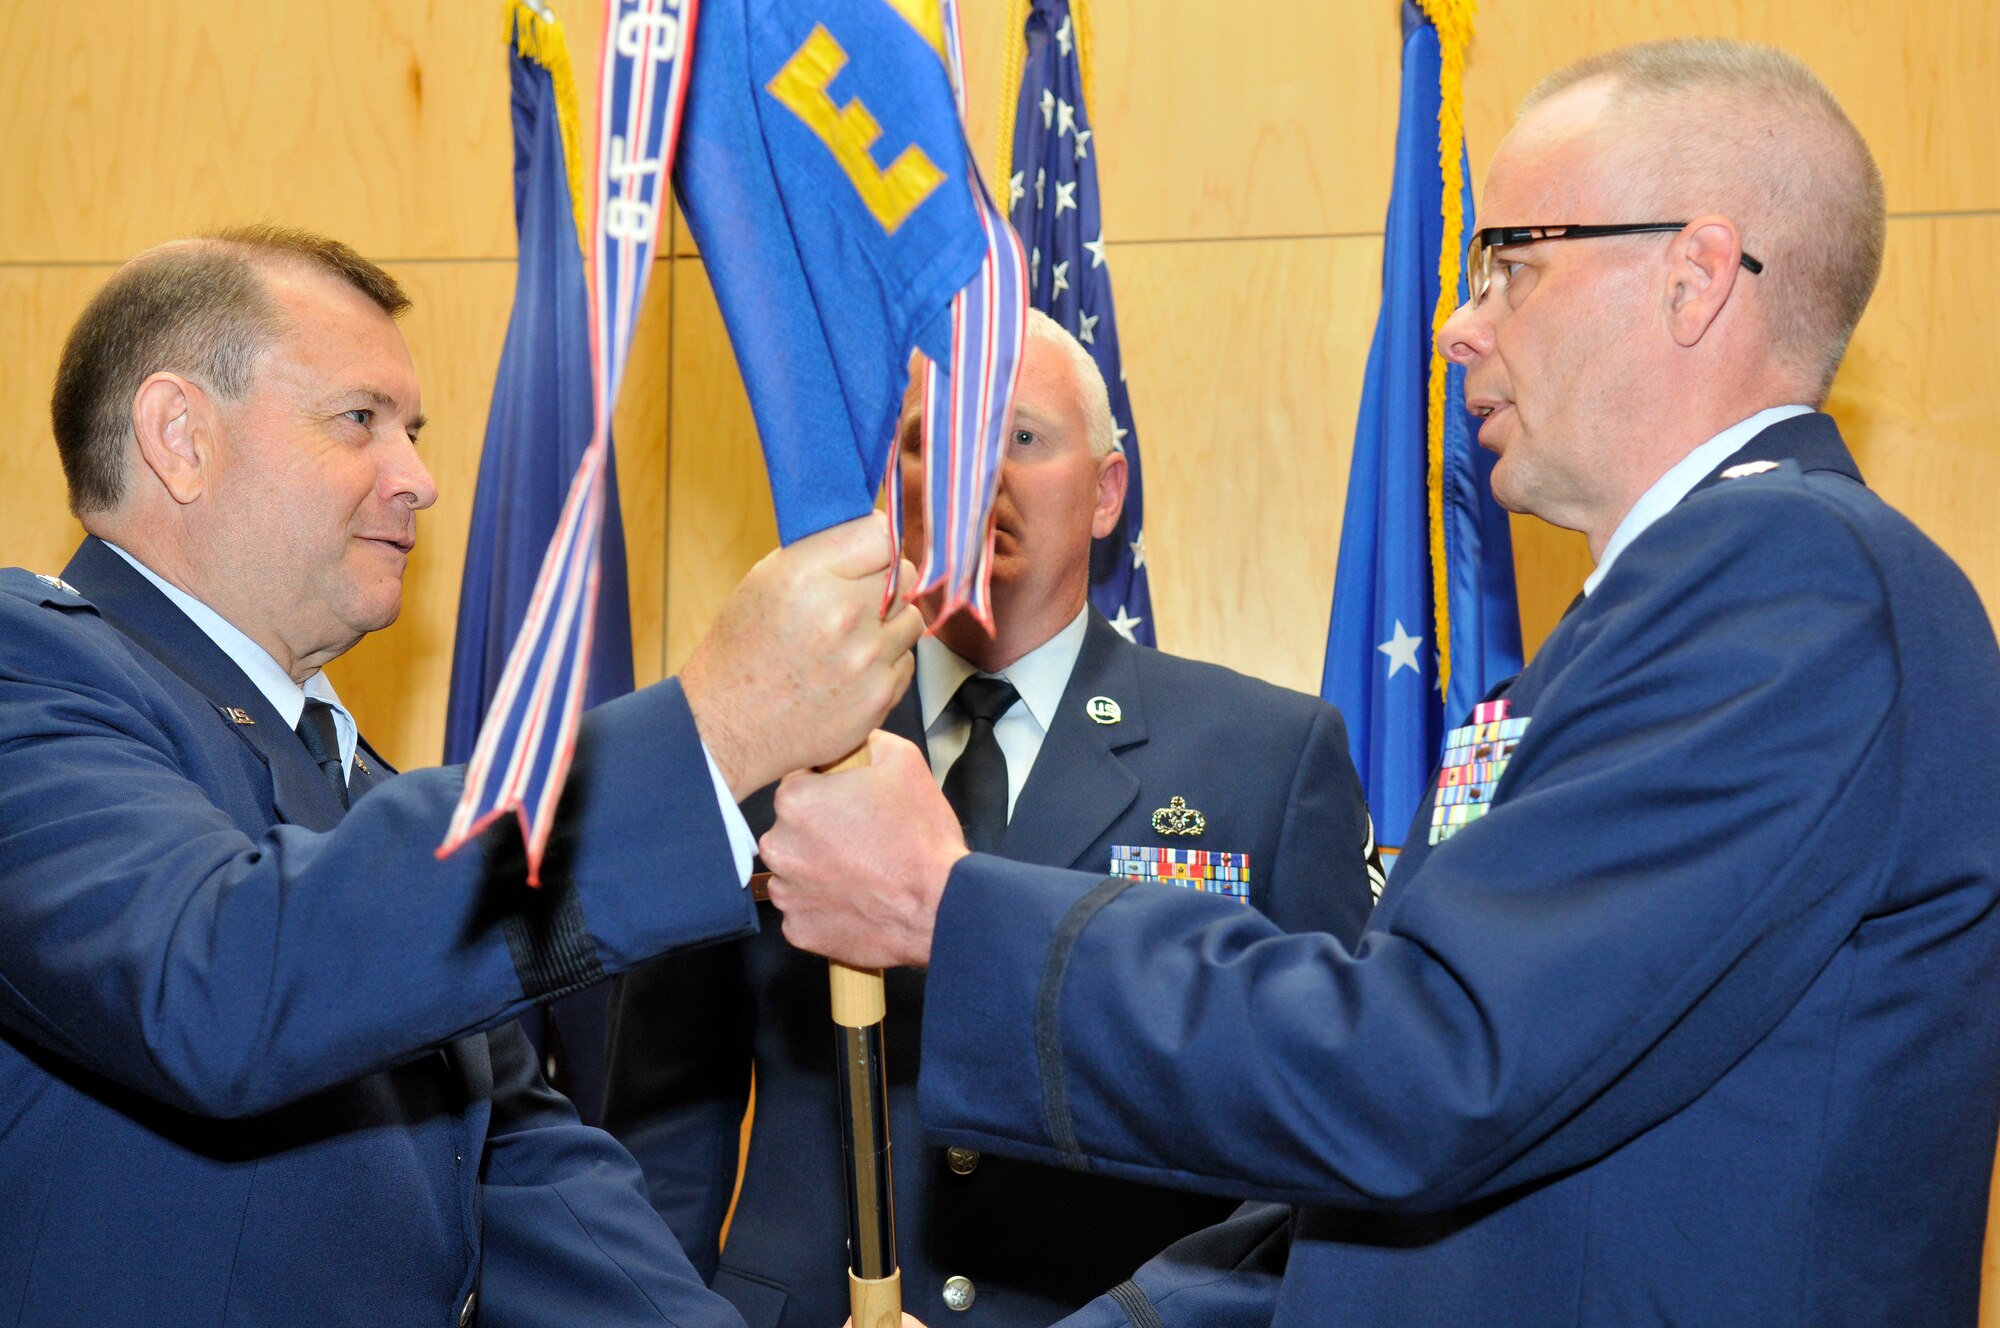 Brig. Gen. David Fountain hands the 130th Engineering Installation Squadron Guidon to Lt. Col. Kevin Tobias during the change of command ceremonyfor the 130th. Lt. Col. Tobias took command of the 130th at the Utah Air National Guard Base in Salt Lake City Utah on June 2 2012. (U.S. Air Force Photo by Tech. Sgt. Jeremy Giacoletto-Stegall/Released)